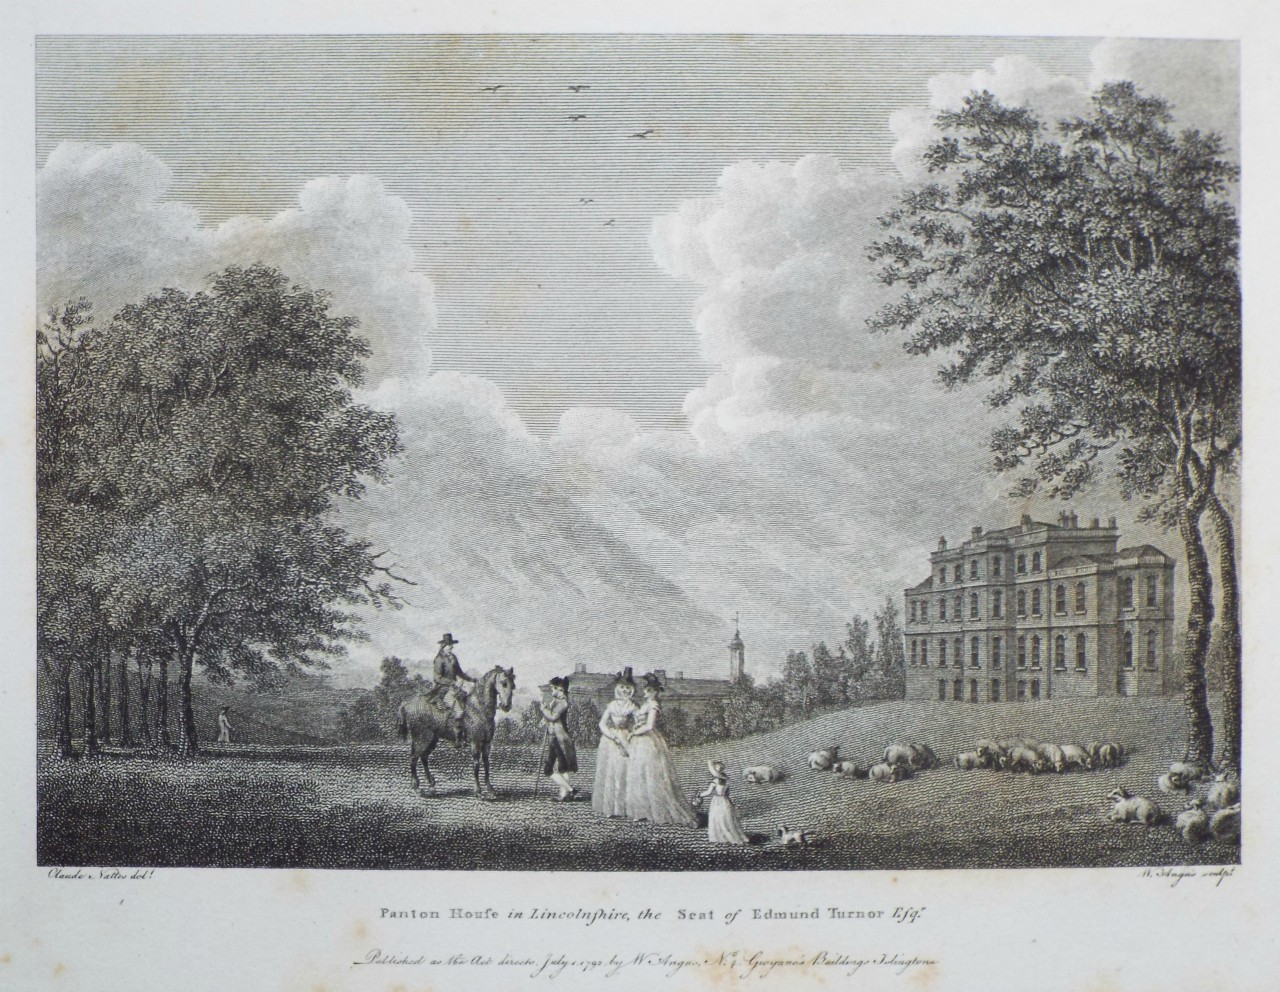 Print - Panton House in Lincolnshire, the Seat of Edmund Turnor Esqr. - Angus